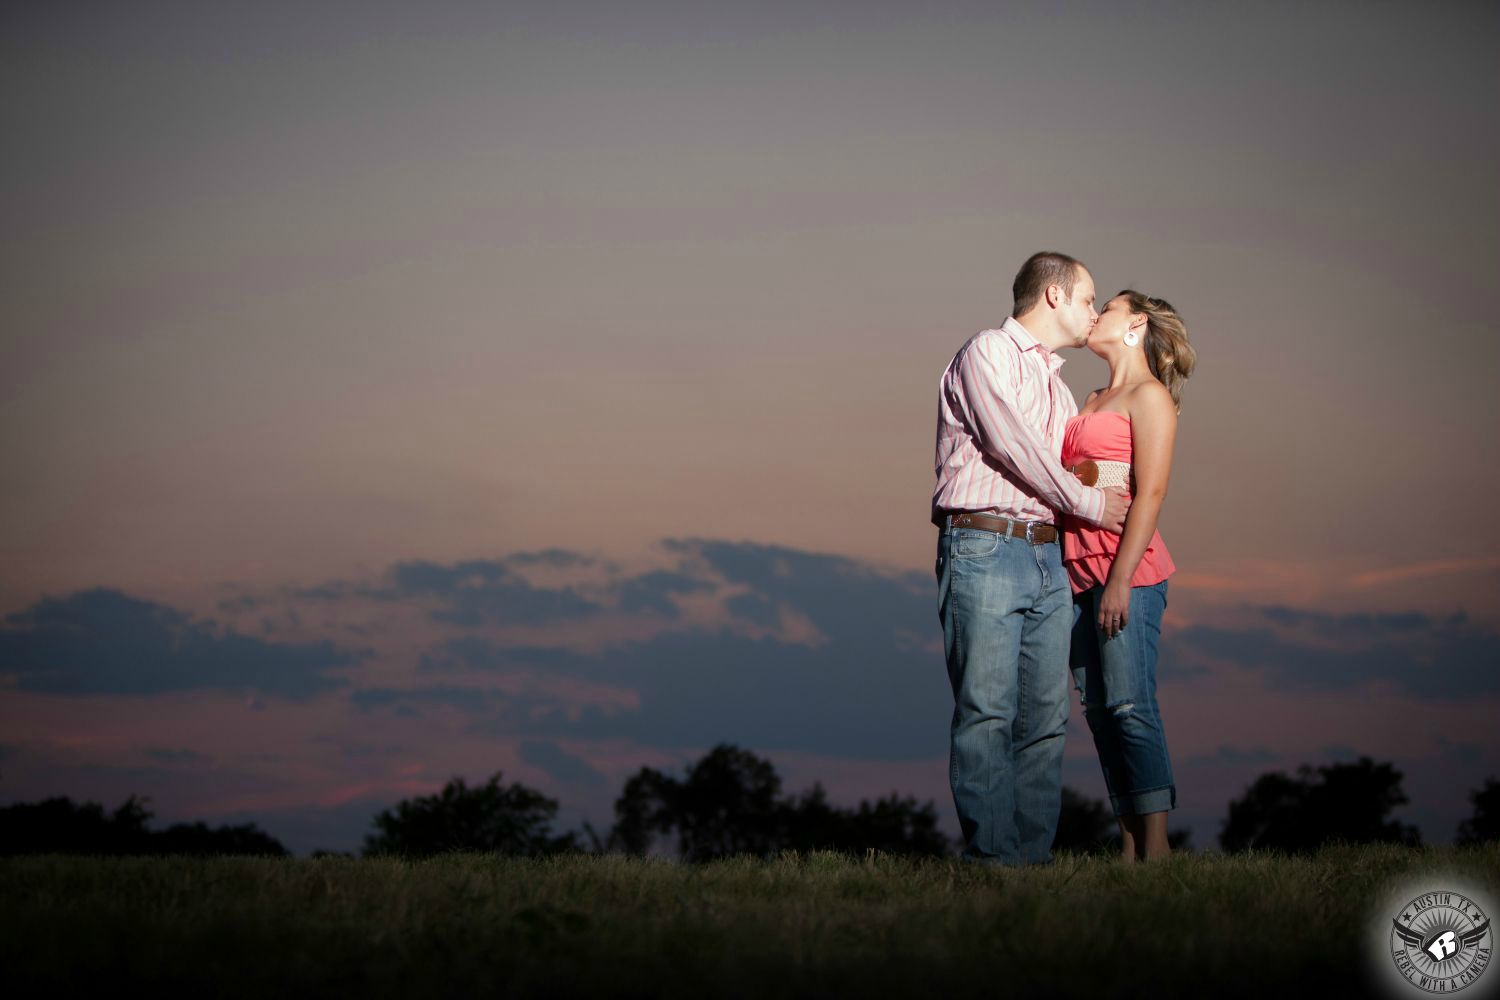 dirty blond girl with hoop earrings wearing a pink strapless top with a white belt, blue Capri jeans kissing a light brown haired guy in a white and pink striped dress shirt, brown belt and blue jeans standing on a slight rise in front of a grey and pink big Texas sky with a string of clouds in this tender engagement photo session in Round Rock, a suburb of Austin.   